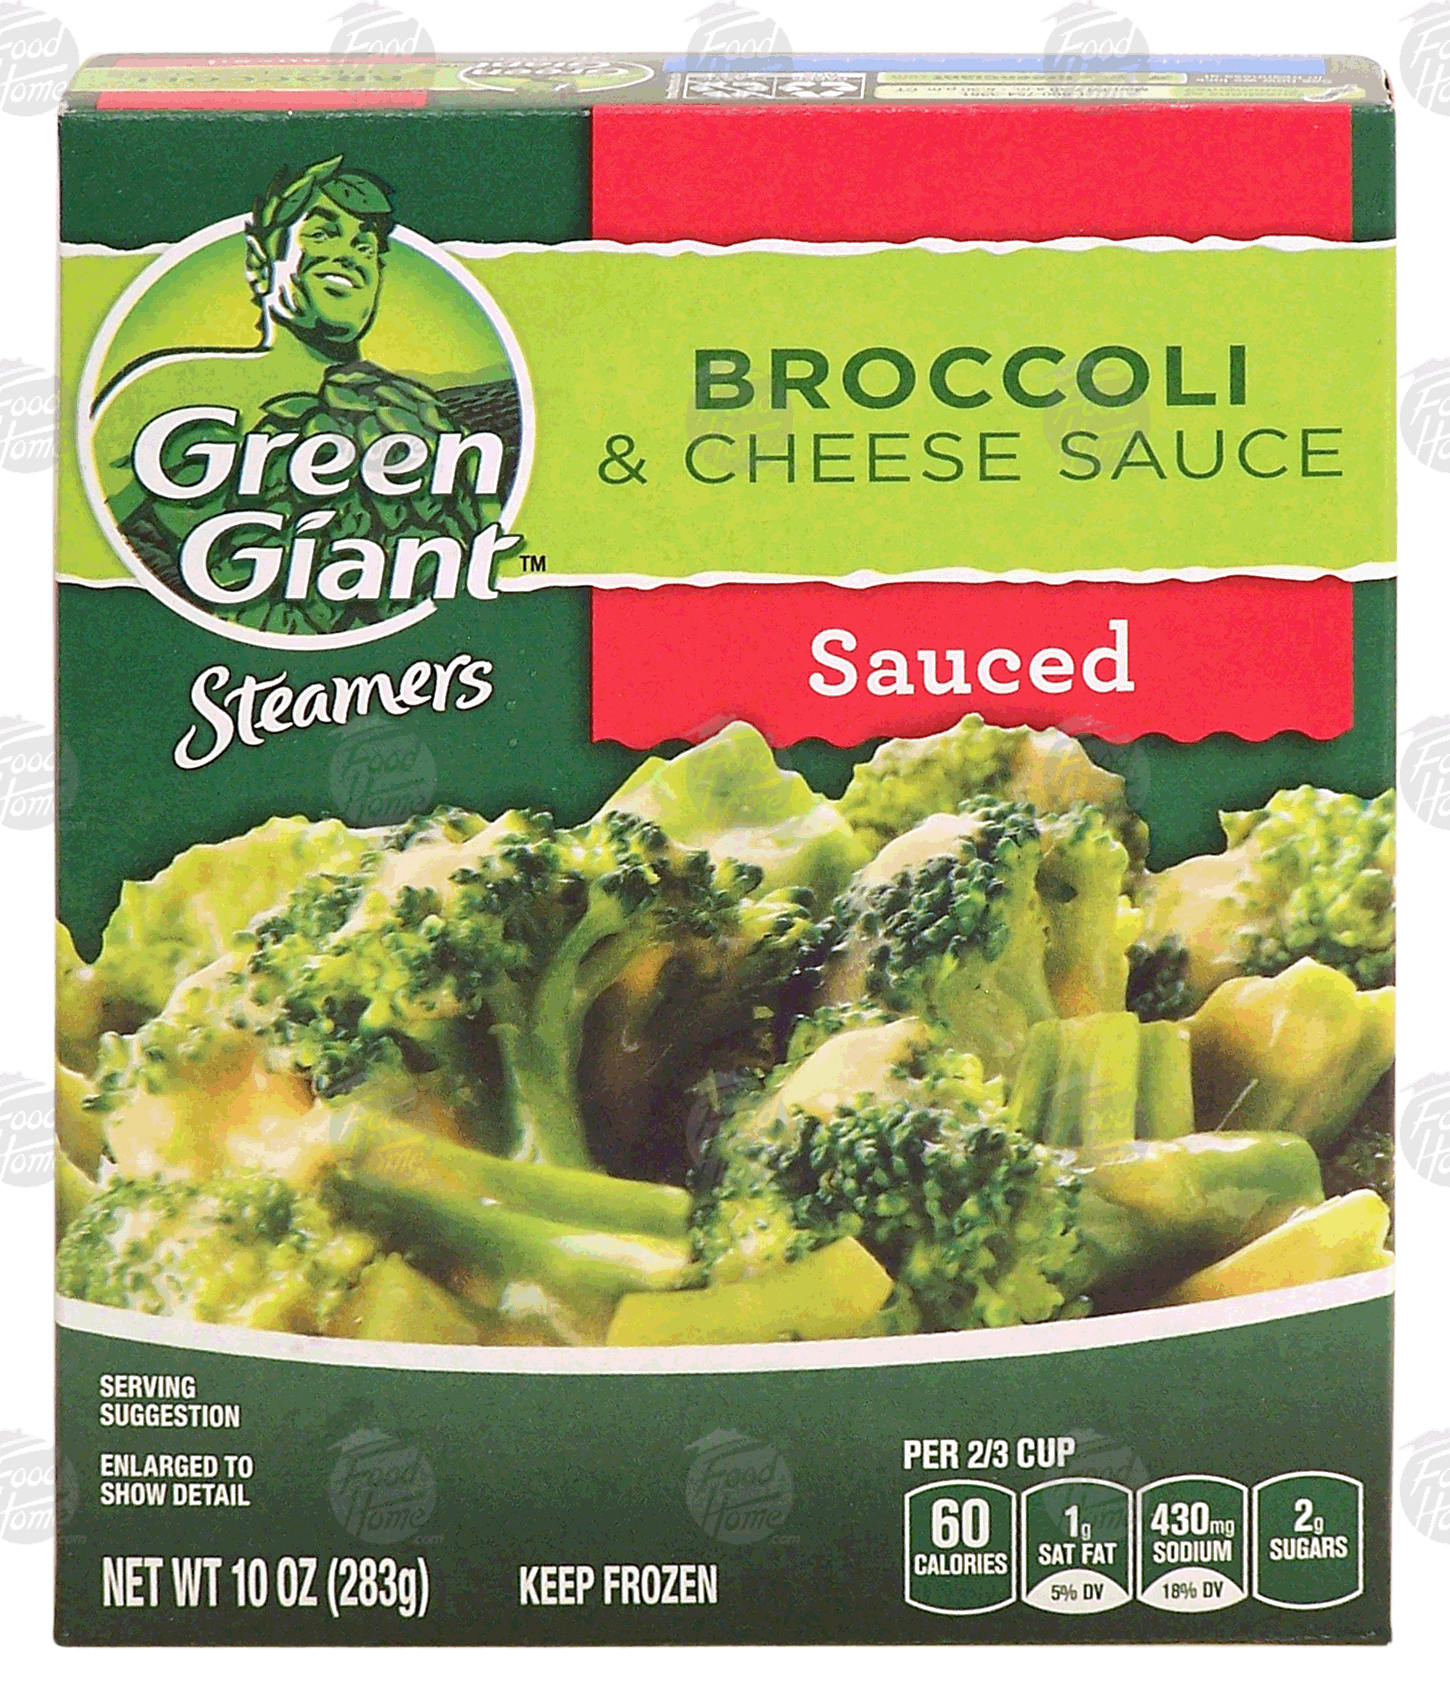 Green Giant Steamers broccoli & cheese sauce Full-Size Picture